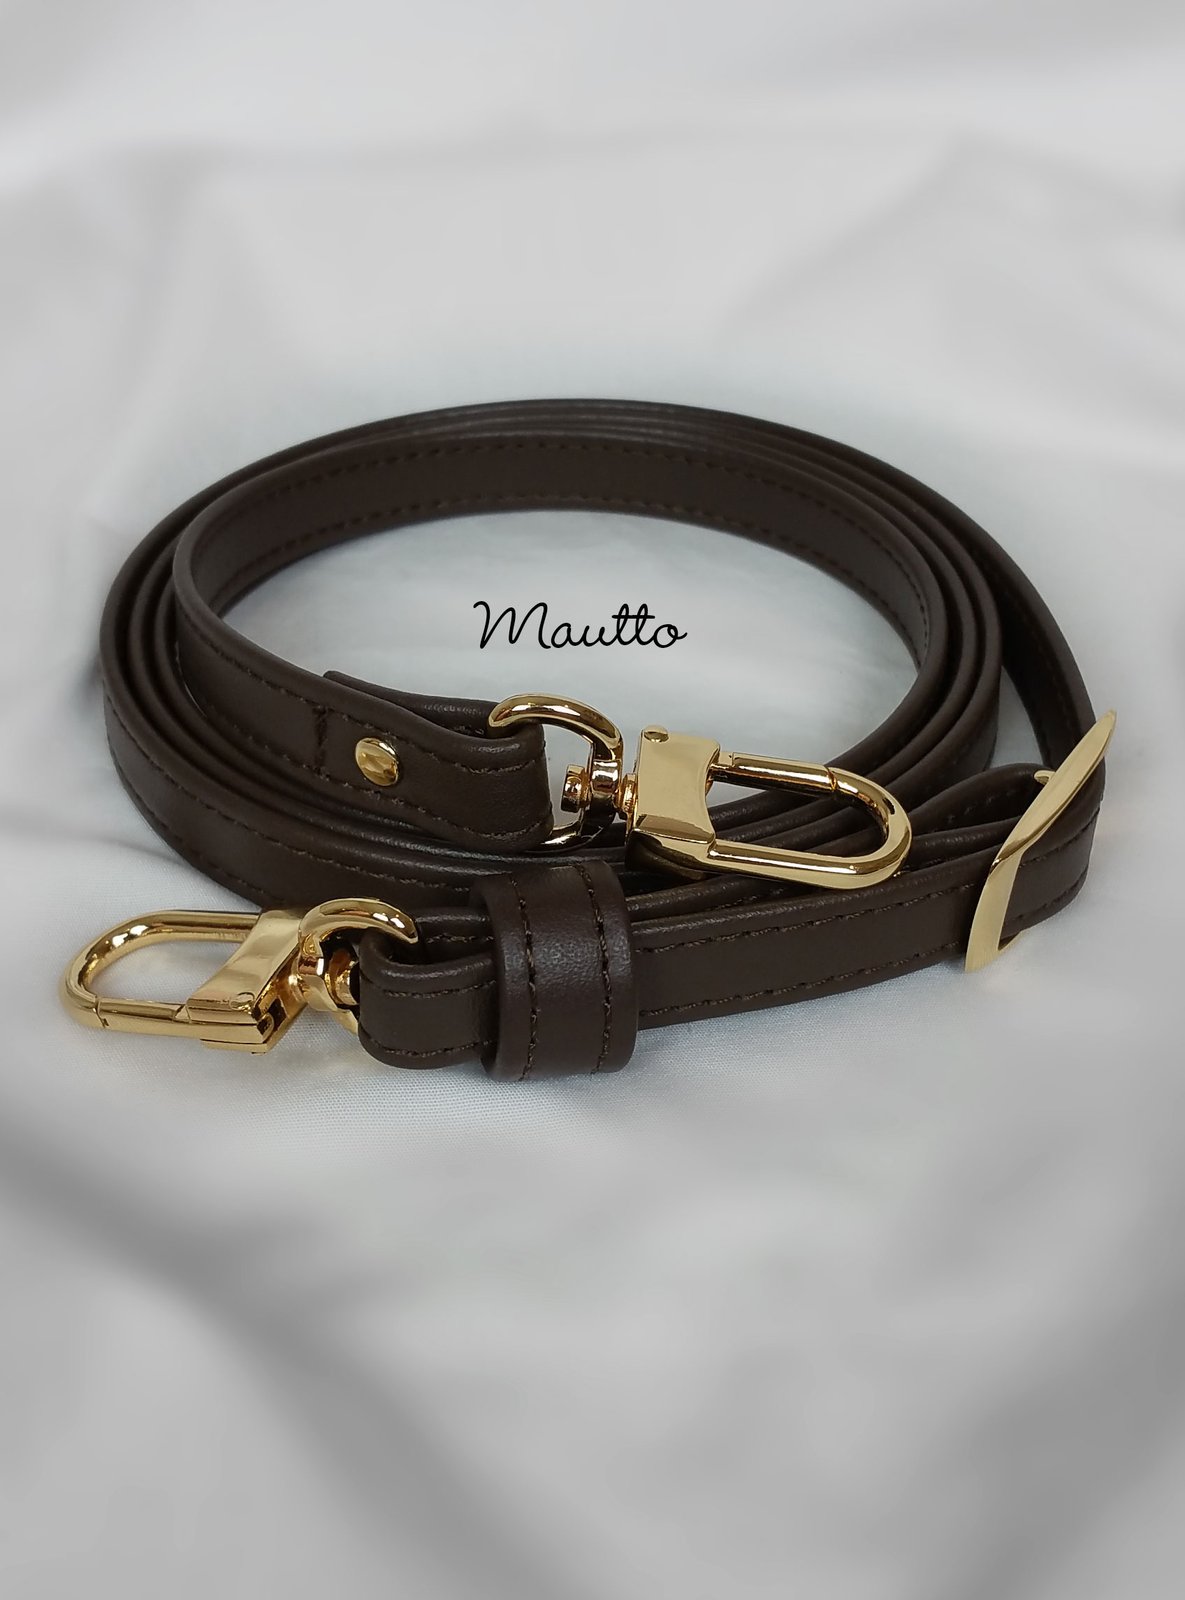 Louis Vuitton Replacement Straps and Repair for LV Bags  Attachable StrapsHandles  for Handbags  Purses  Leat  Lv handbags Louis vuitton strap Handbag  straps